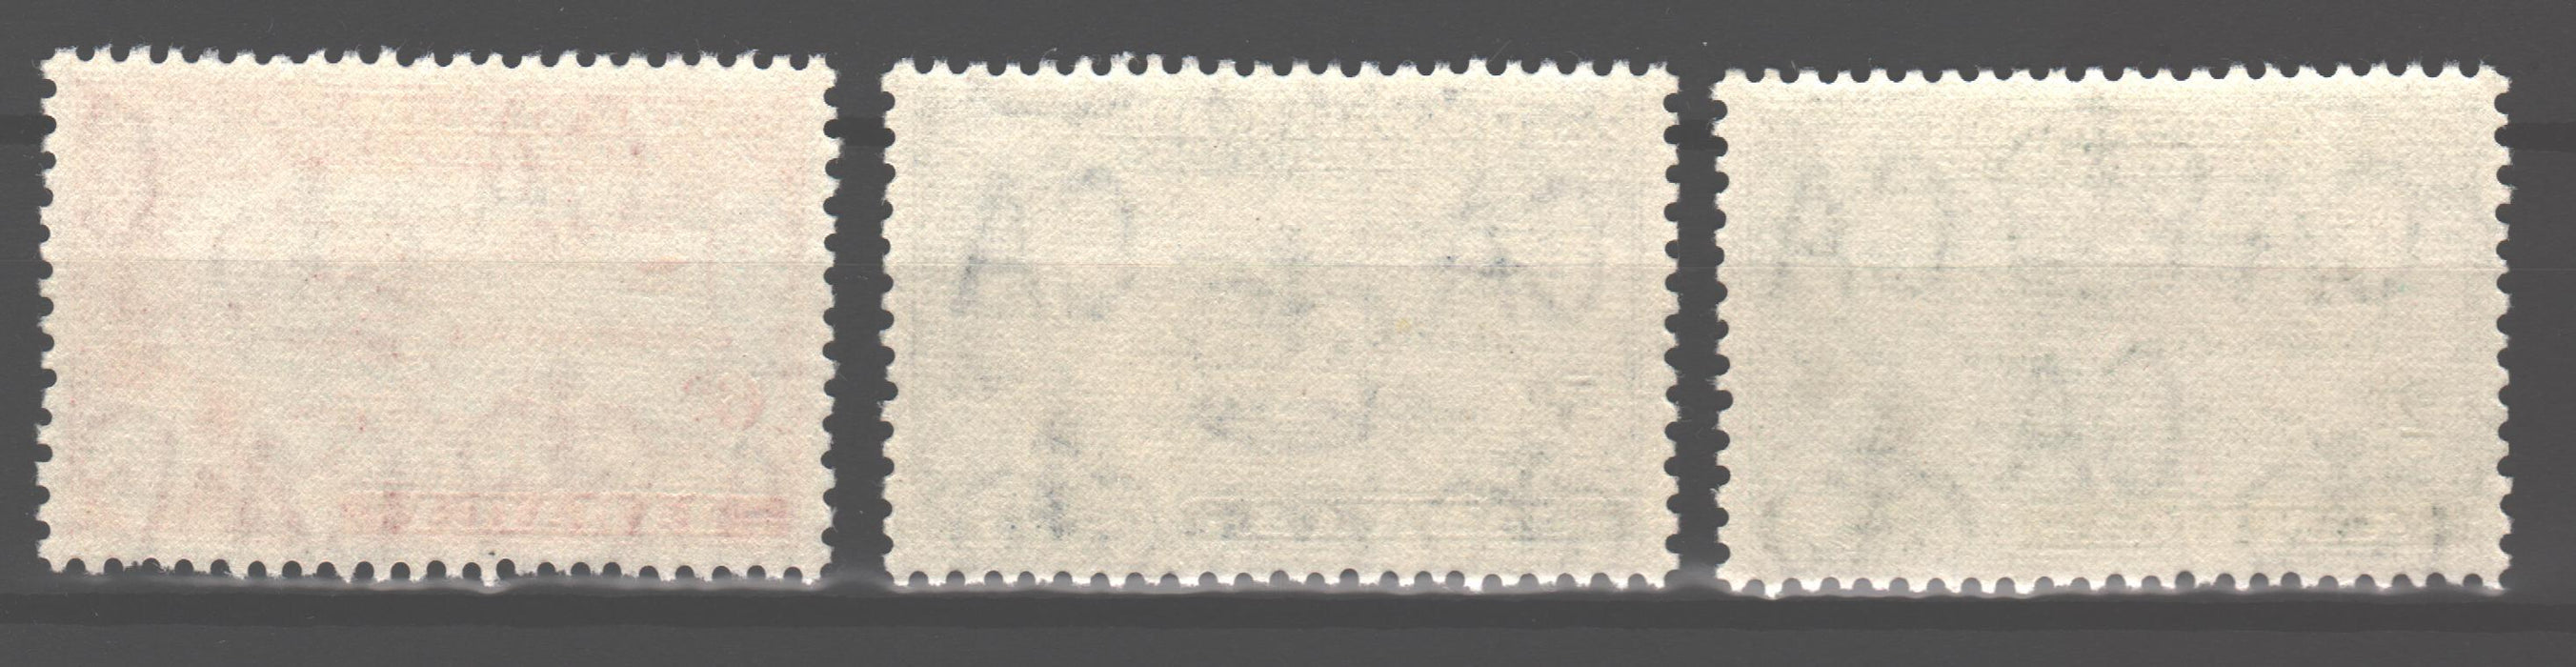 Jamaica 1958 West Indies Issue Scott #175-177 c.v. 3.10$ - (TIP A) in Stamps Mall